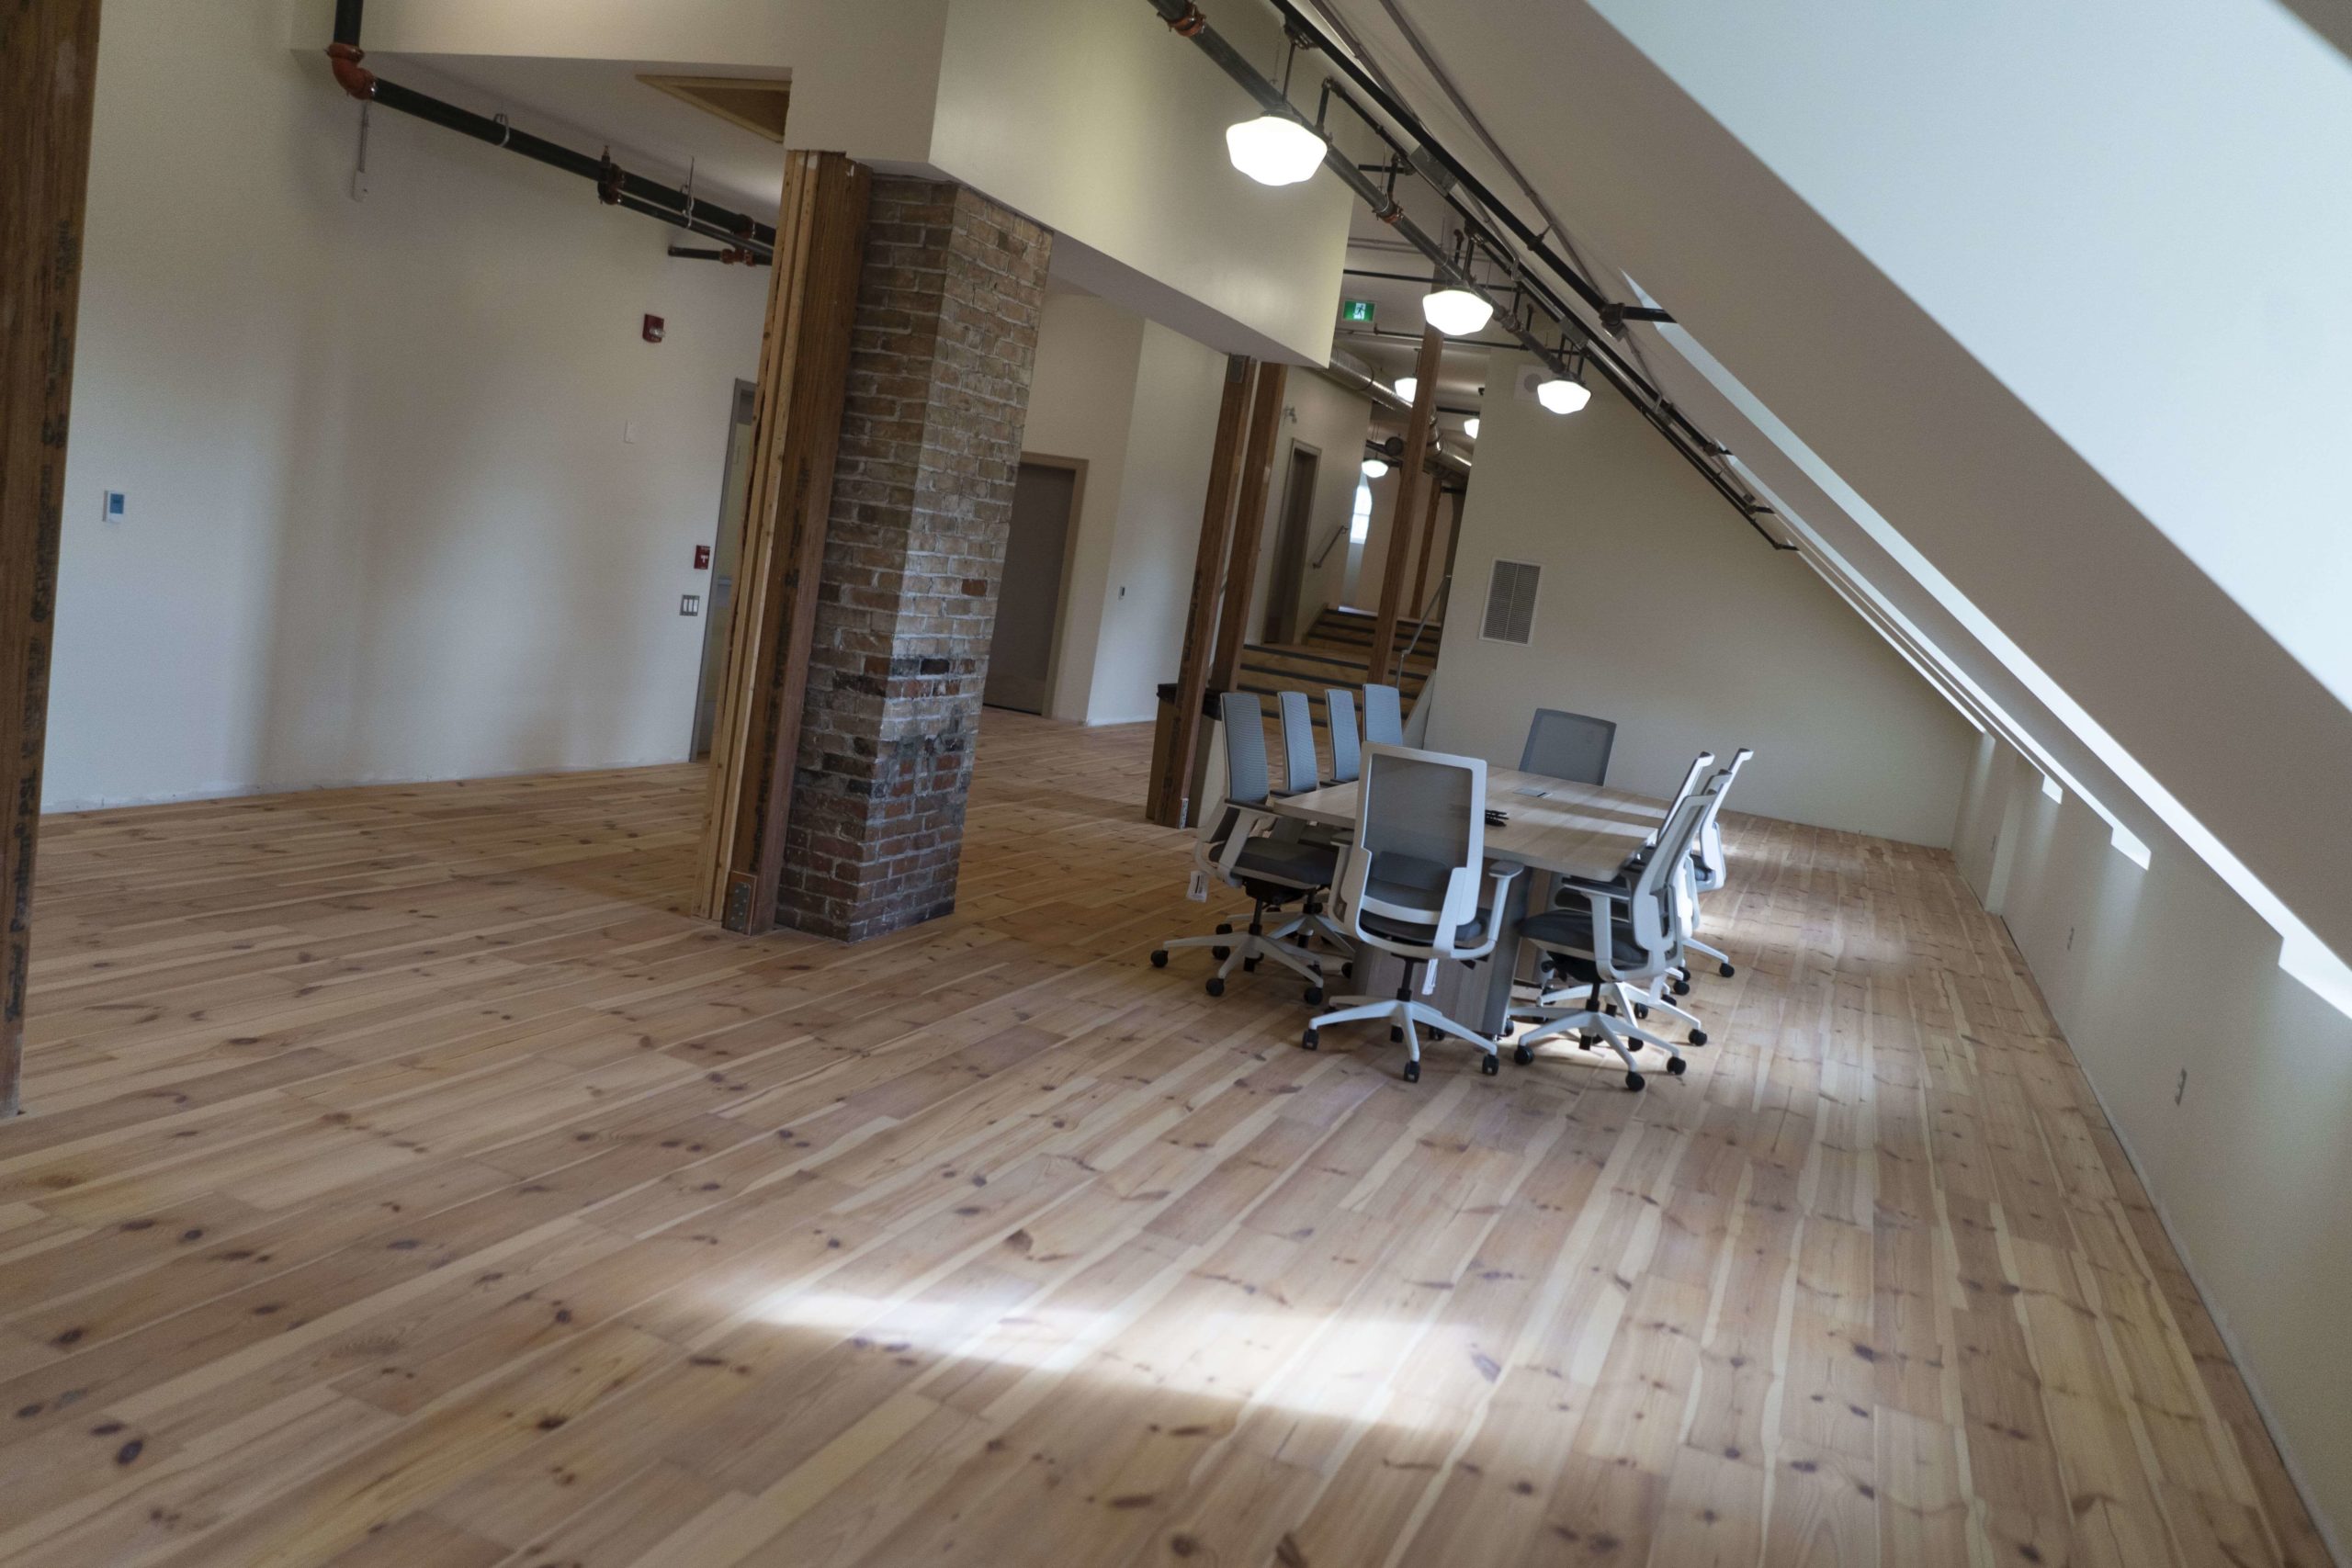 Open office space with desk and chairs